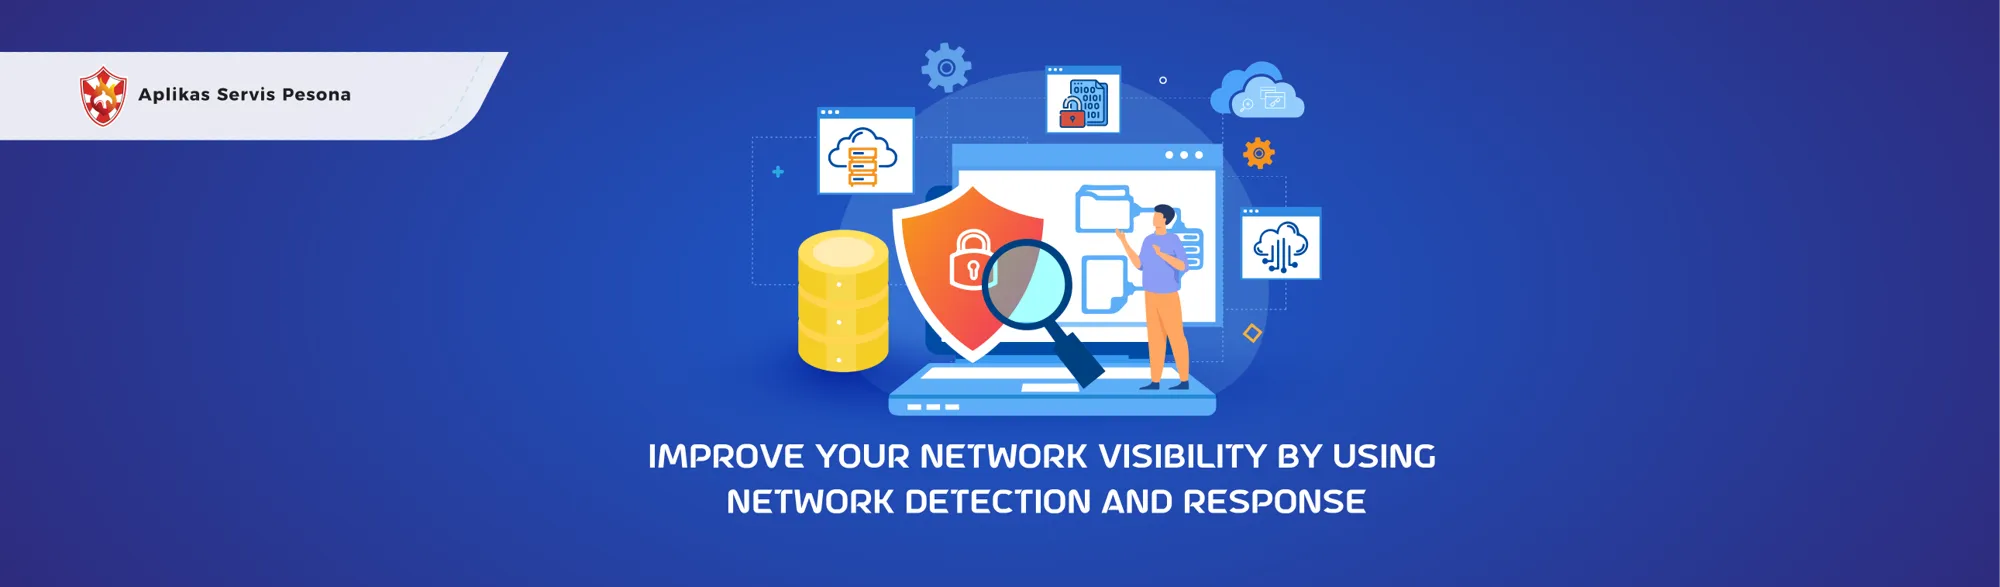 Improve Your Network Visibility by Using Network Detection and Response